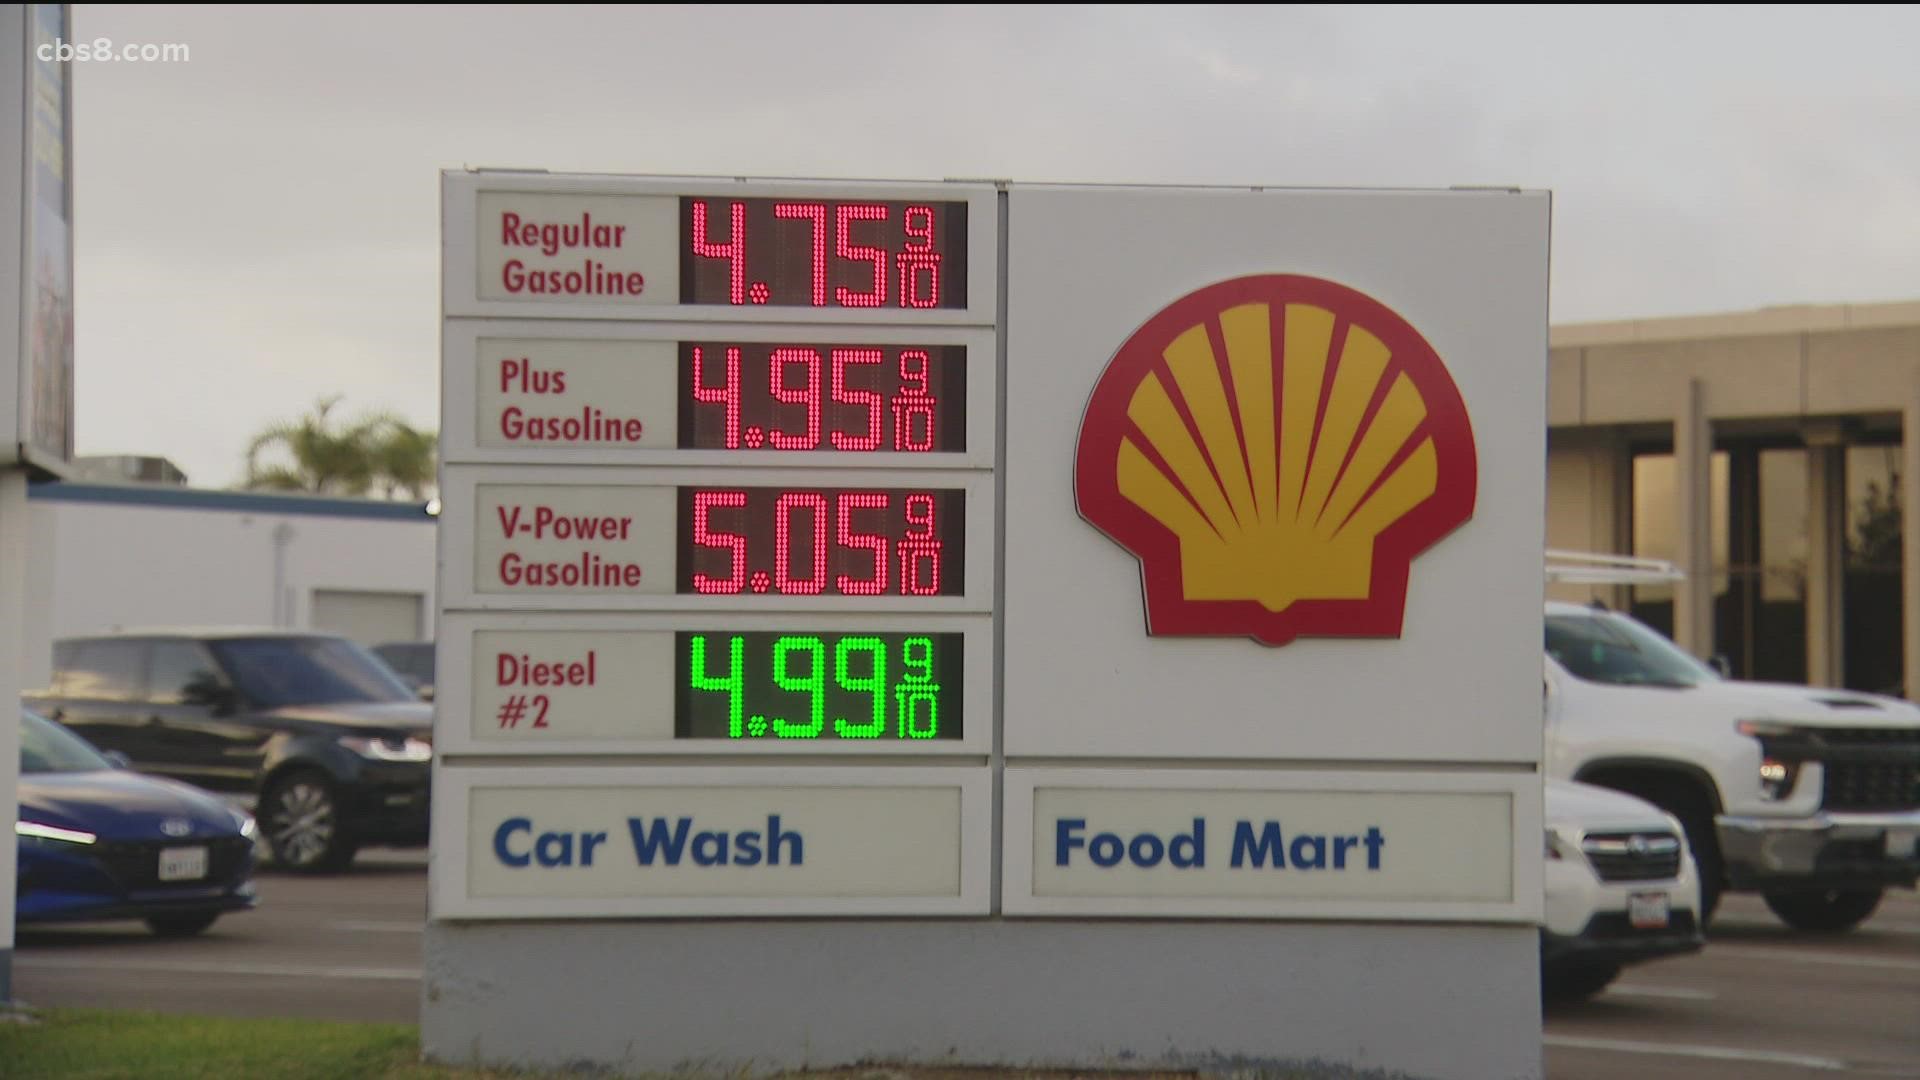 San Diego drivers are paying $1.20 more per gallon than one year ago, meaning the cost to fill up the tank for a mid-size sedan is about $17 more than last year.